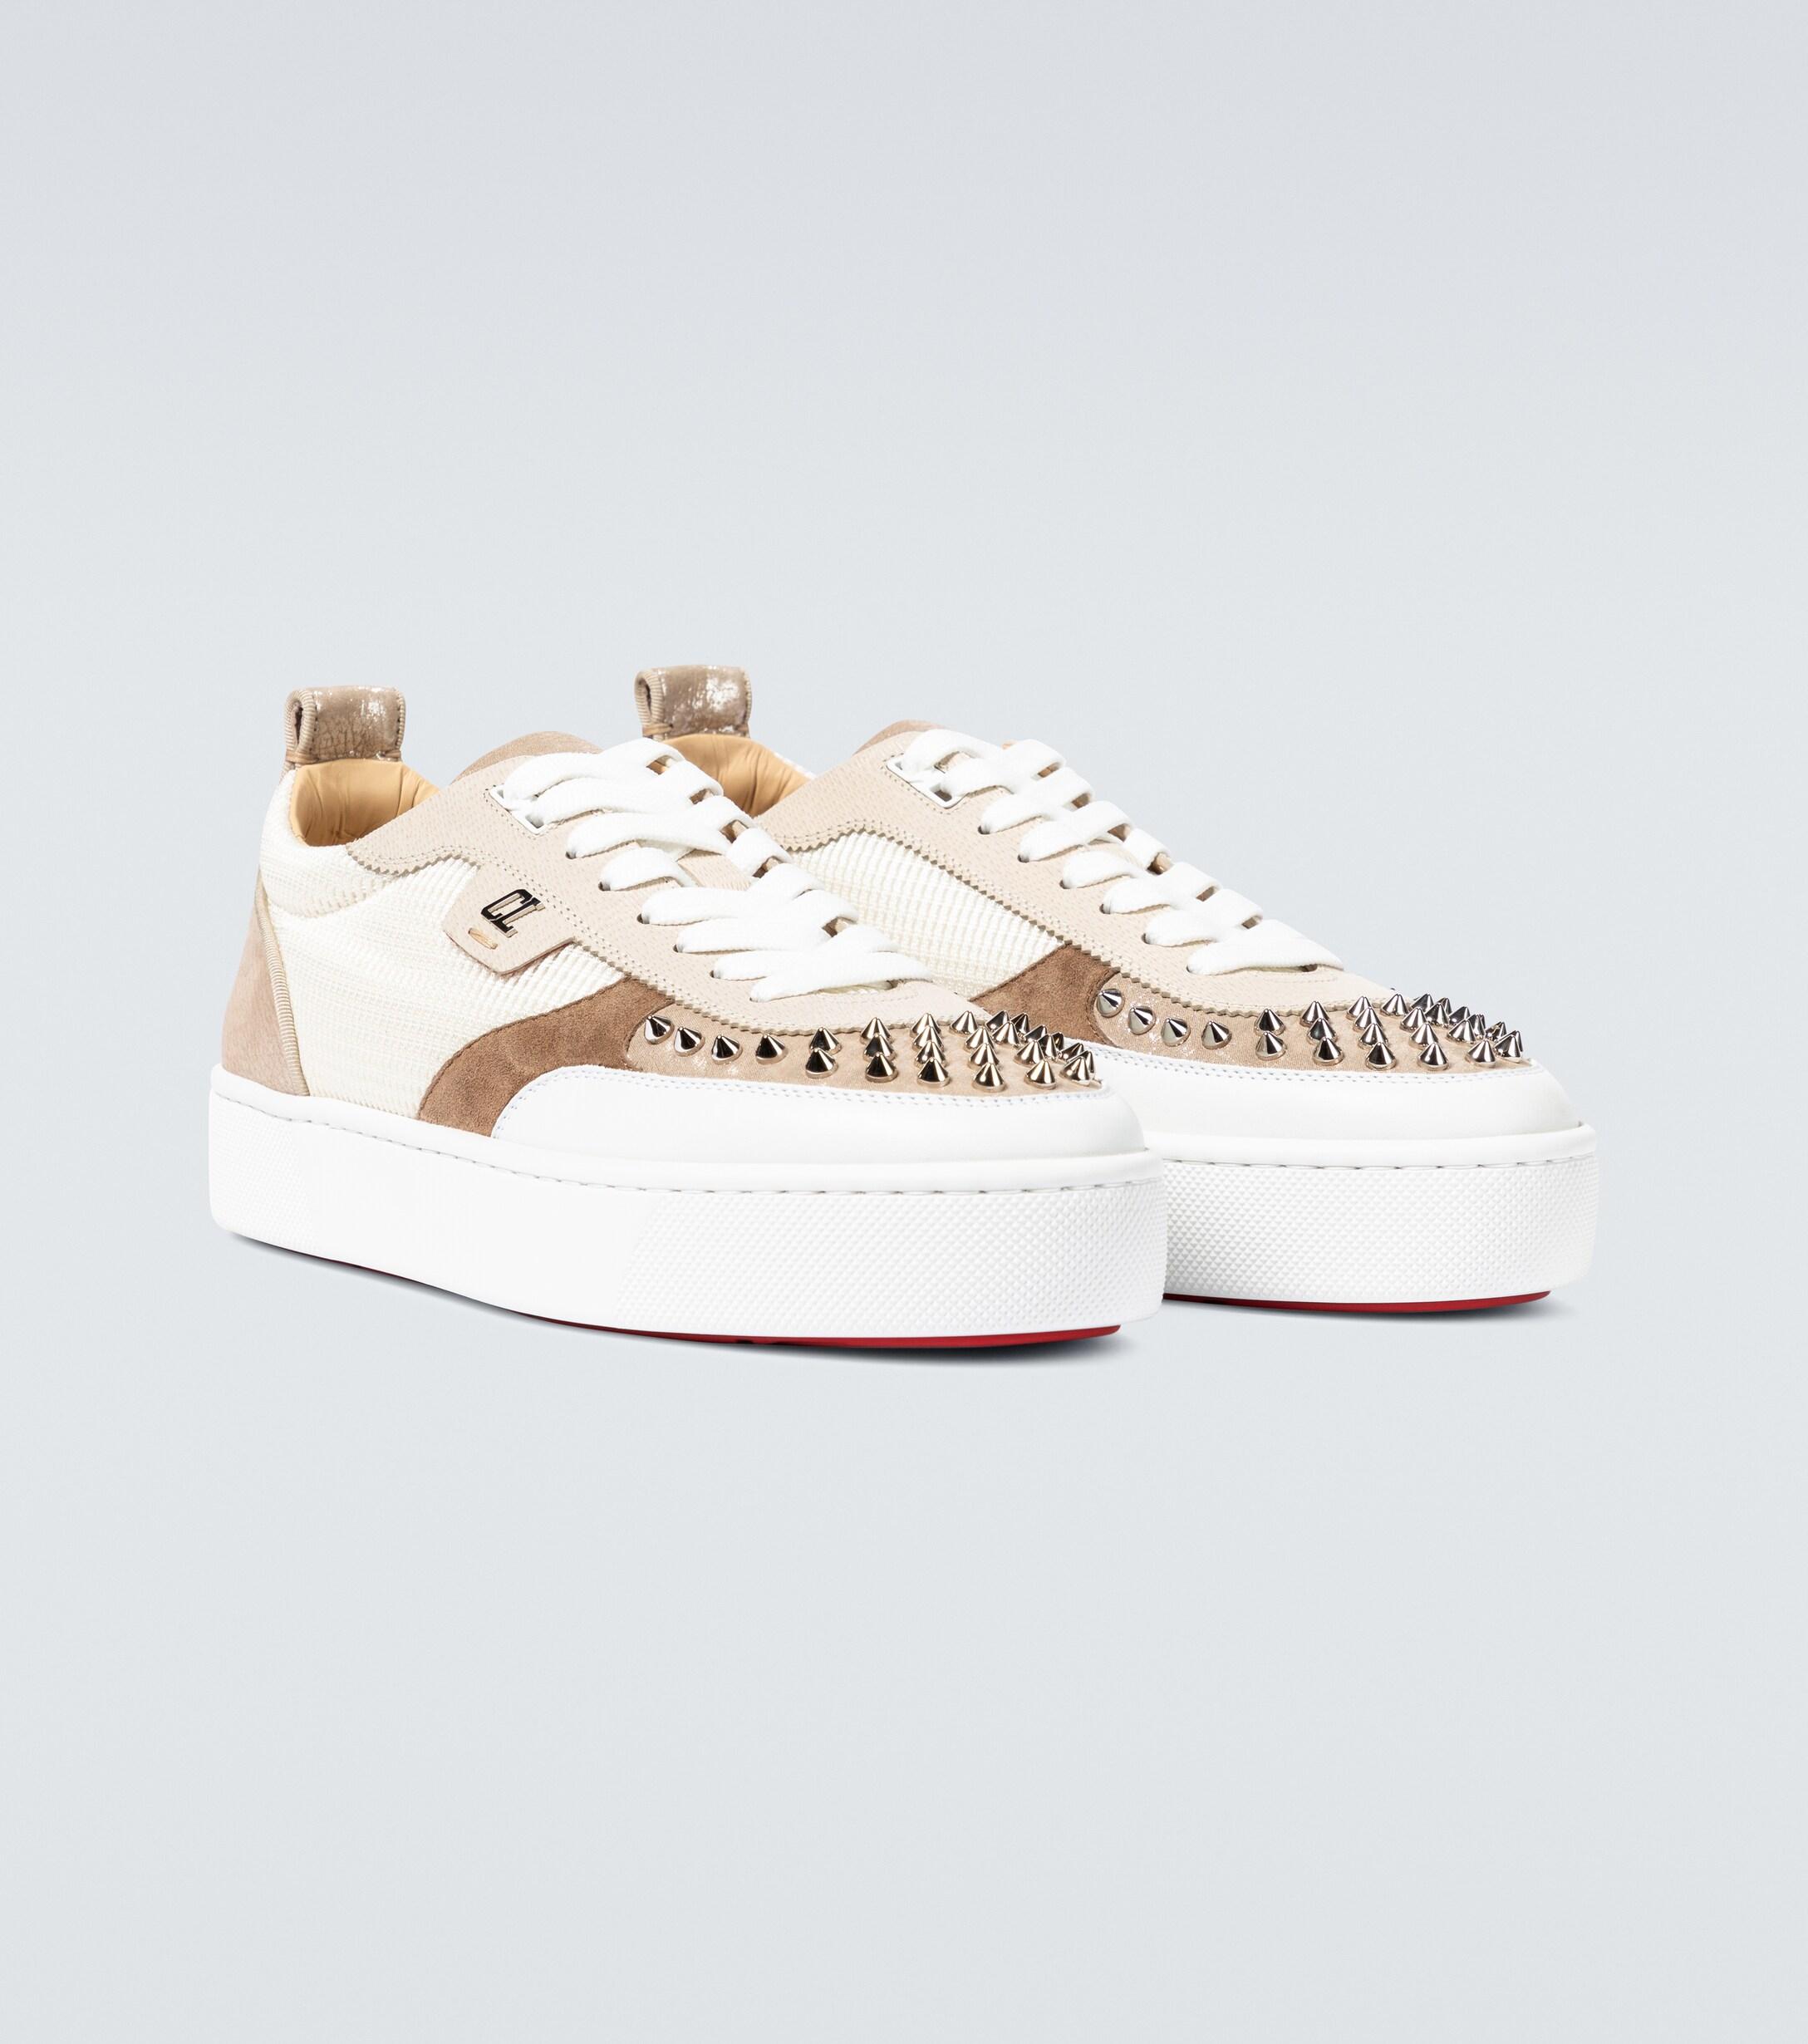 Christian Louboutin Leather Happyrui Spikes Sneakers for Men 